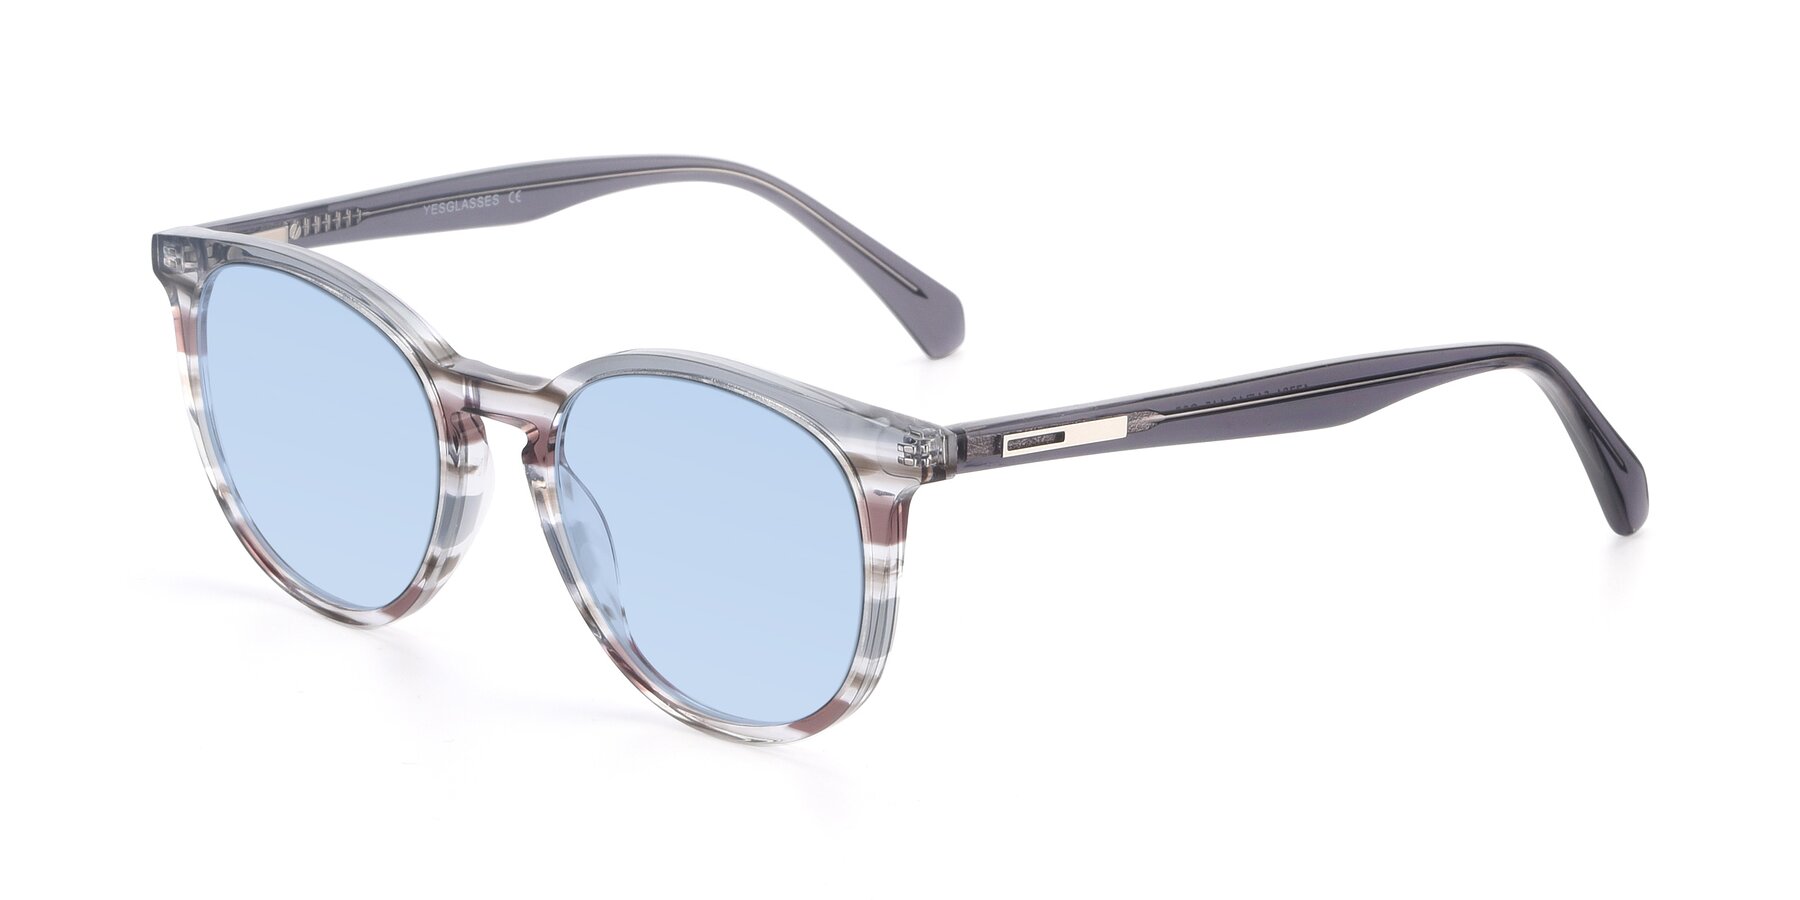 Angle of 17721 in Stripe Grey with Light Blue Tinted Lenses